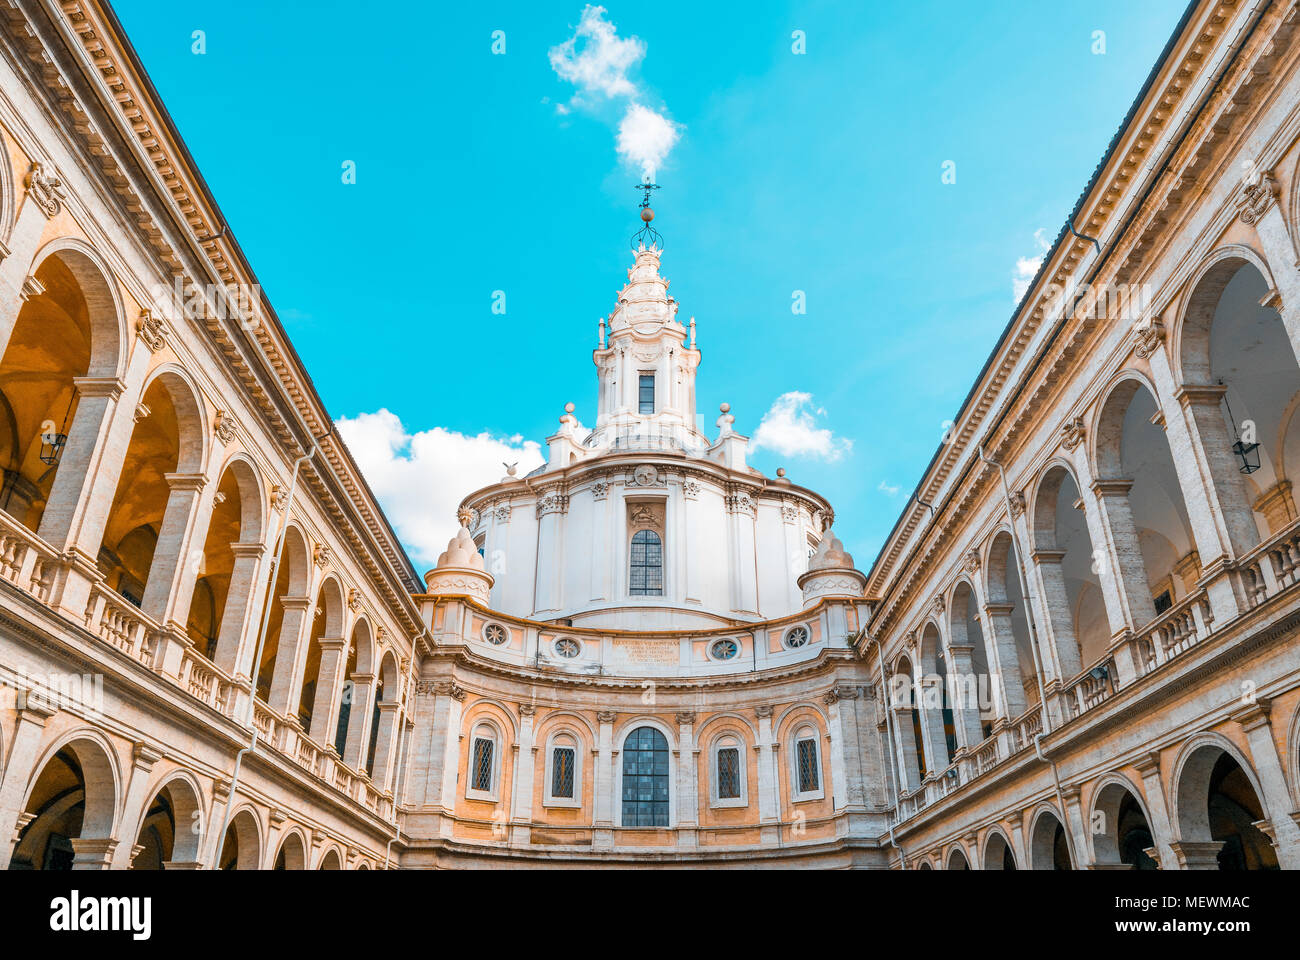 Church of Sant'Ivo alla Sapienza seen from the portico with columns Stock Photo